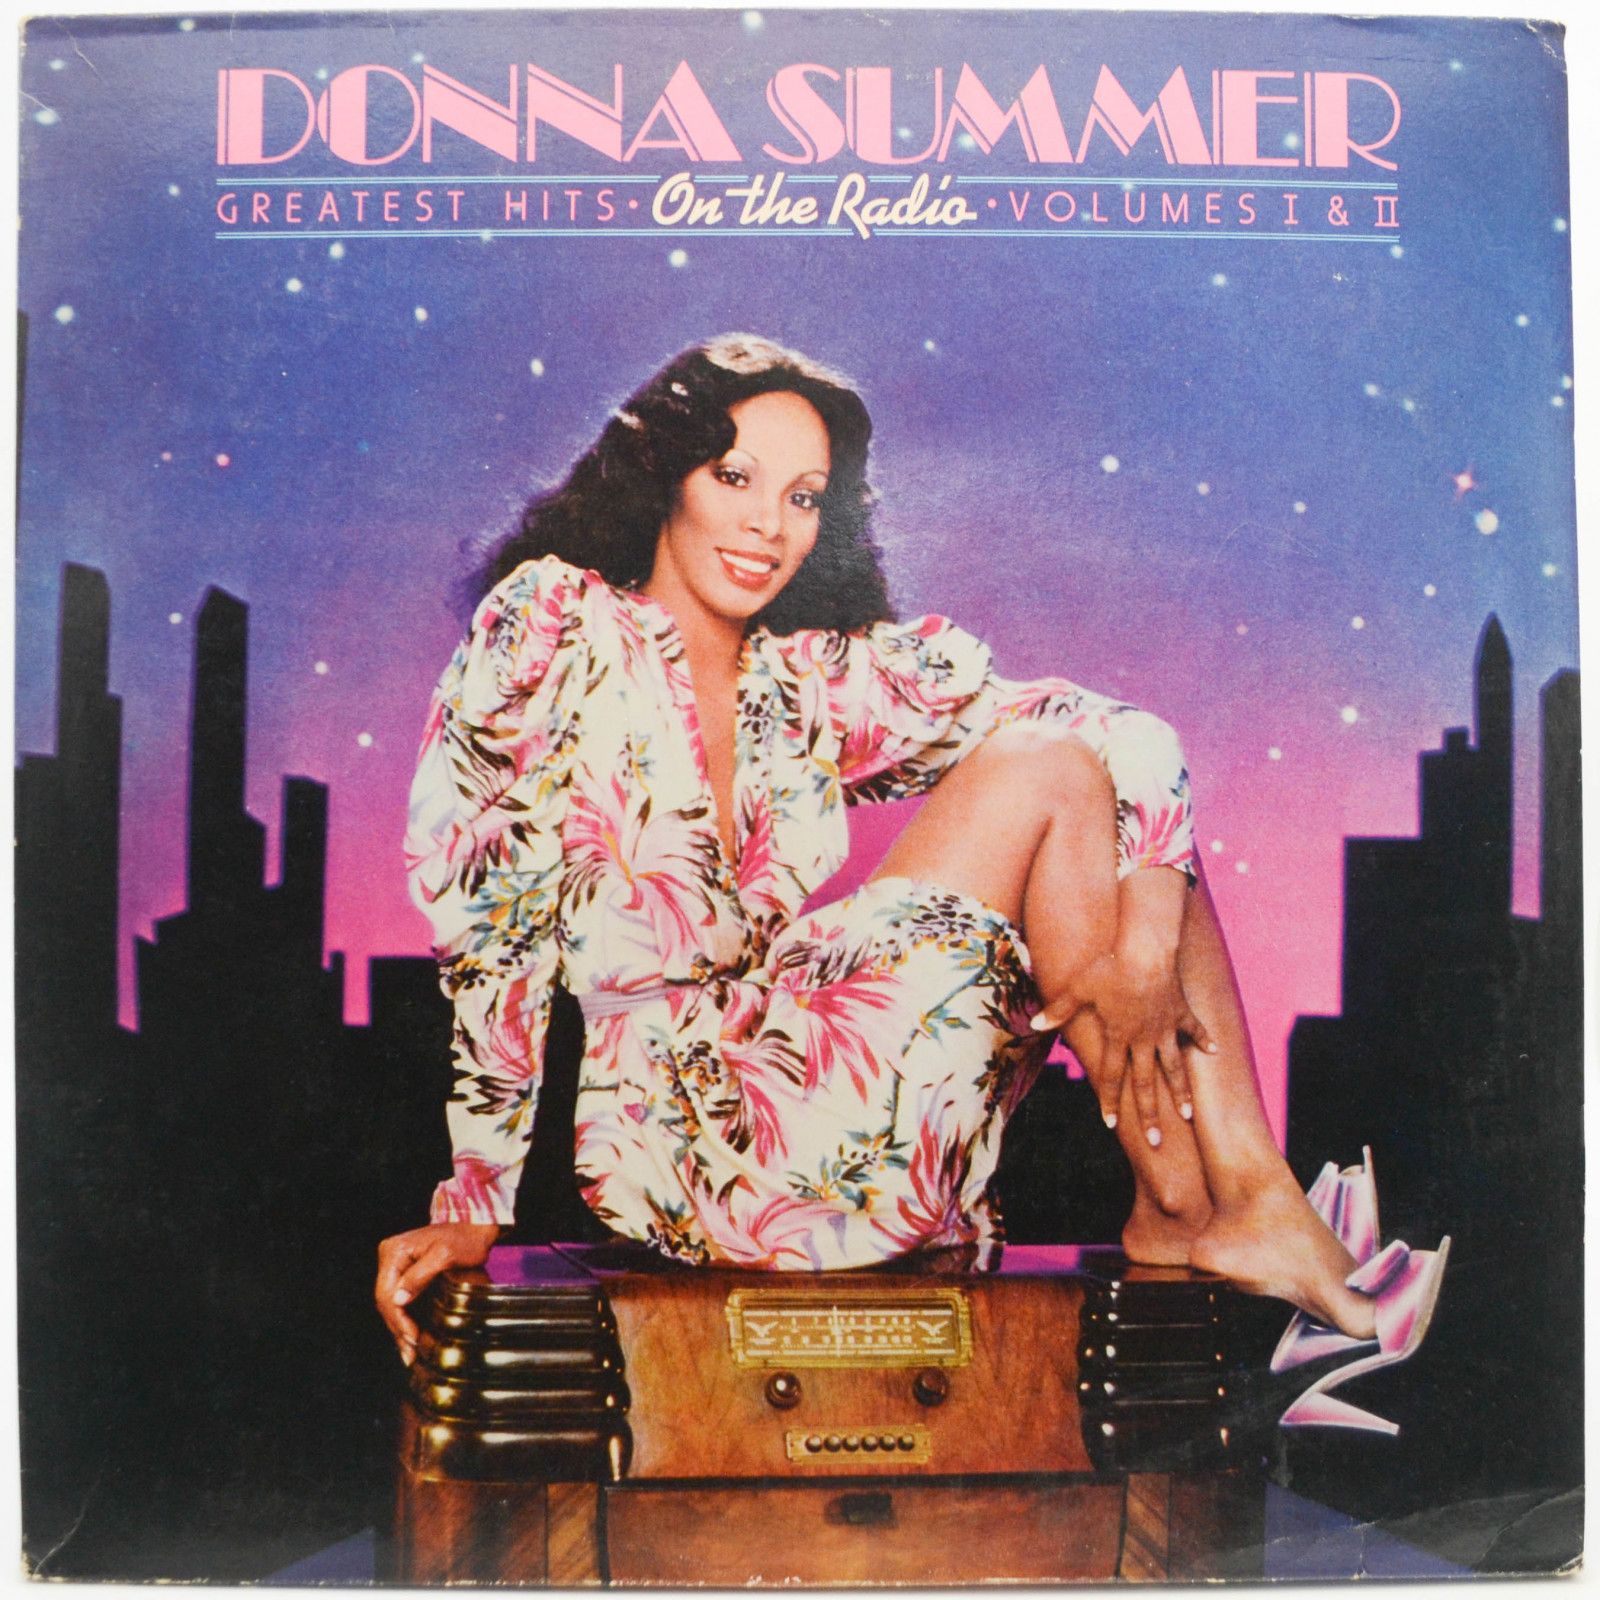 Donna Summer — On The Radio - Greatest Hits Volumes I & II (2LP, USA, poster), 1979